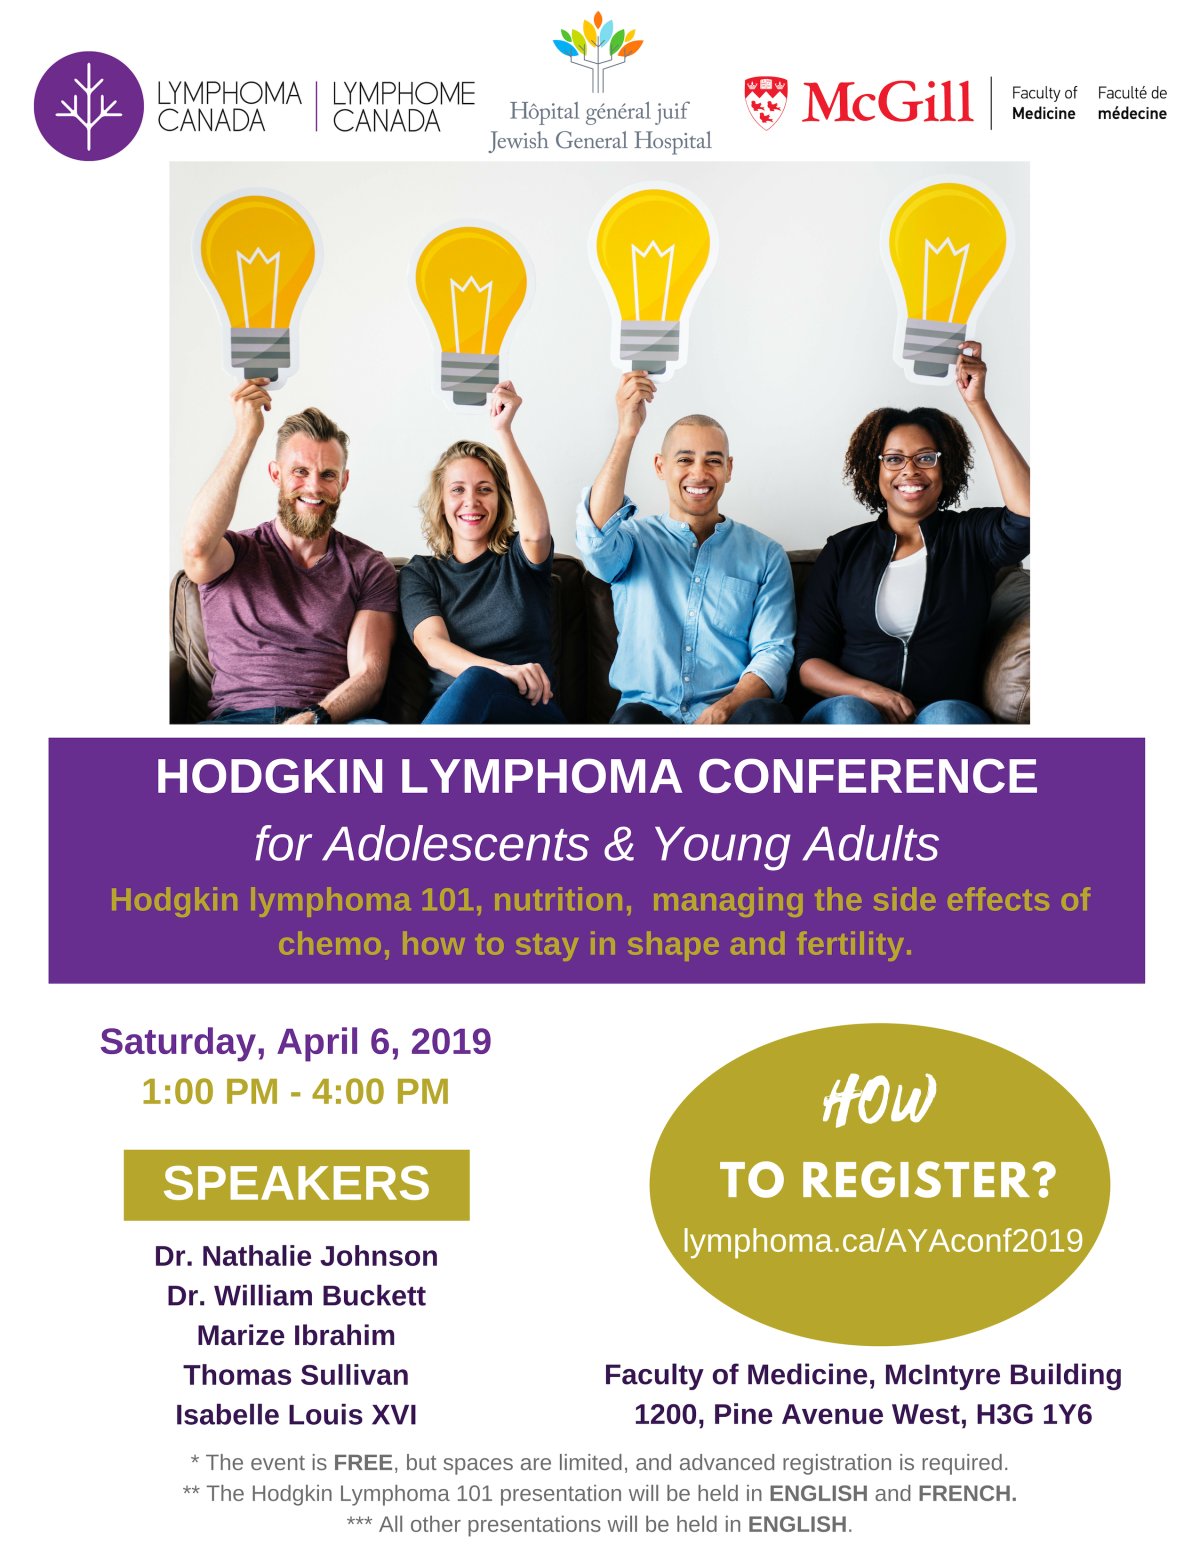 Hodgkin Lymphoma Conference for Adolescents and Young Adults - image